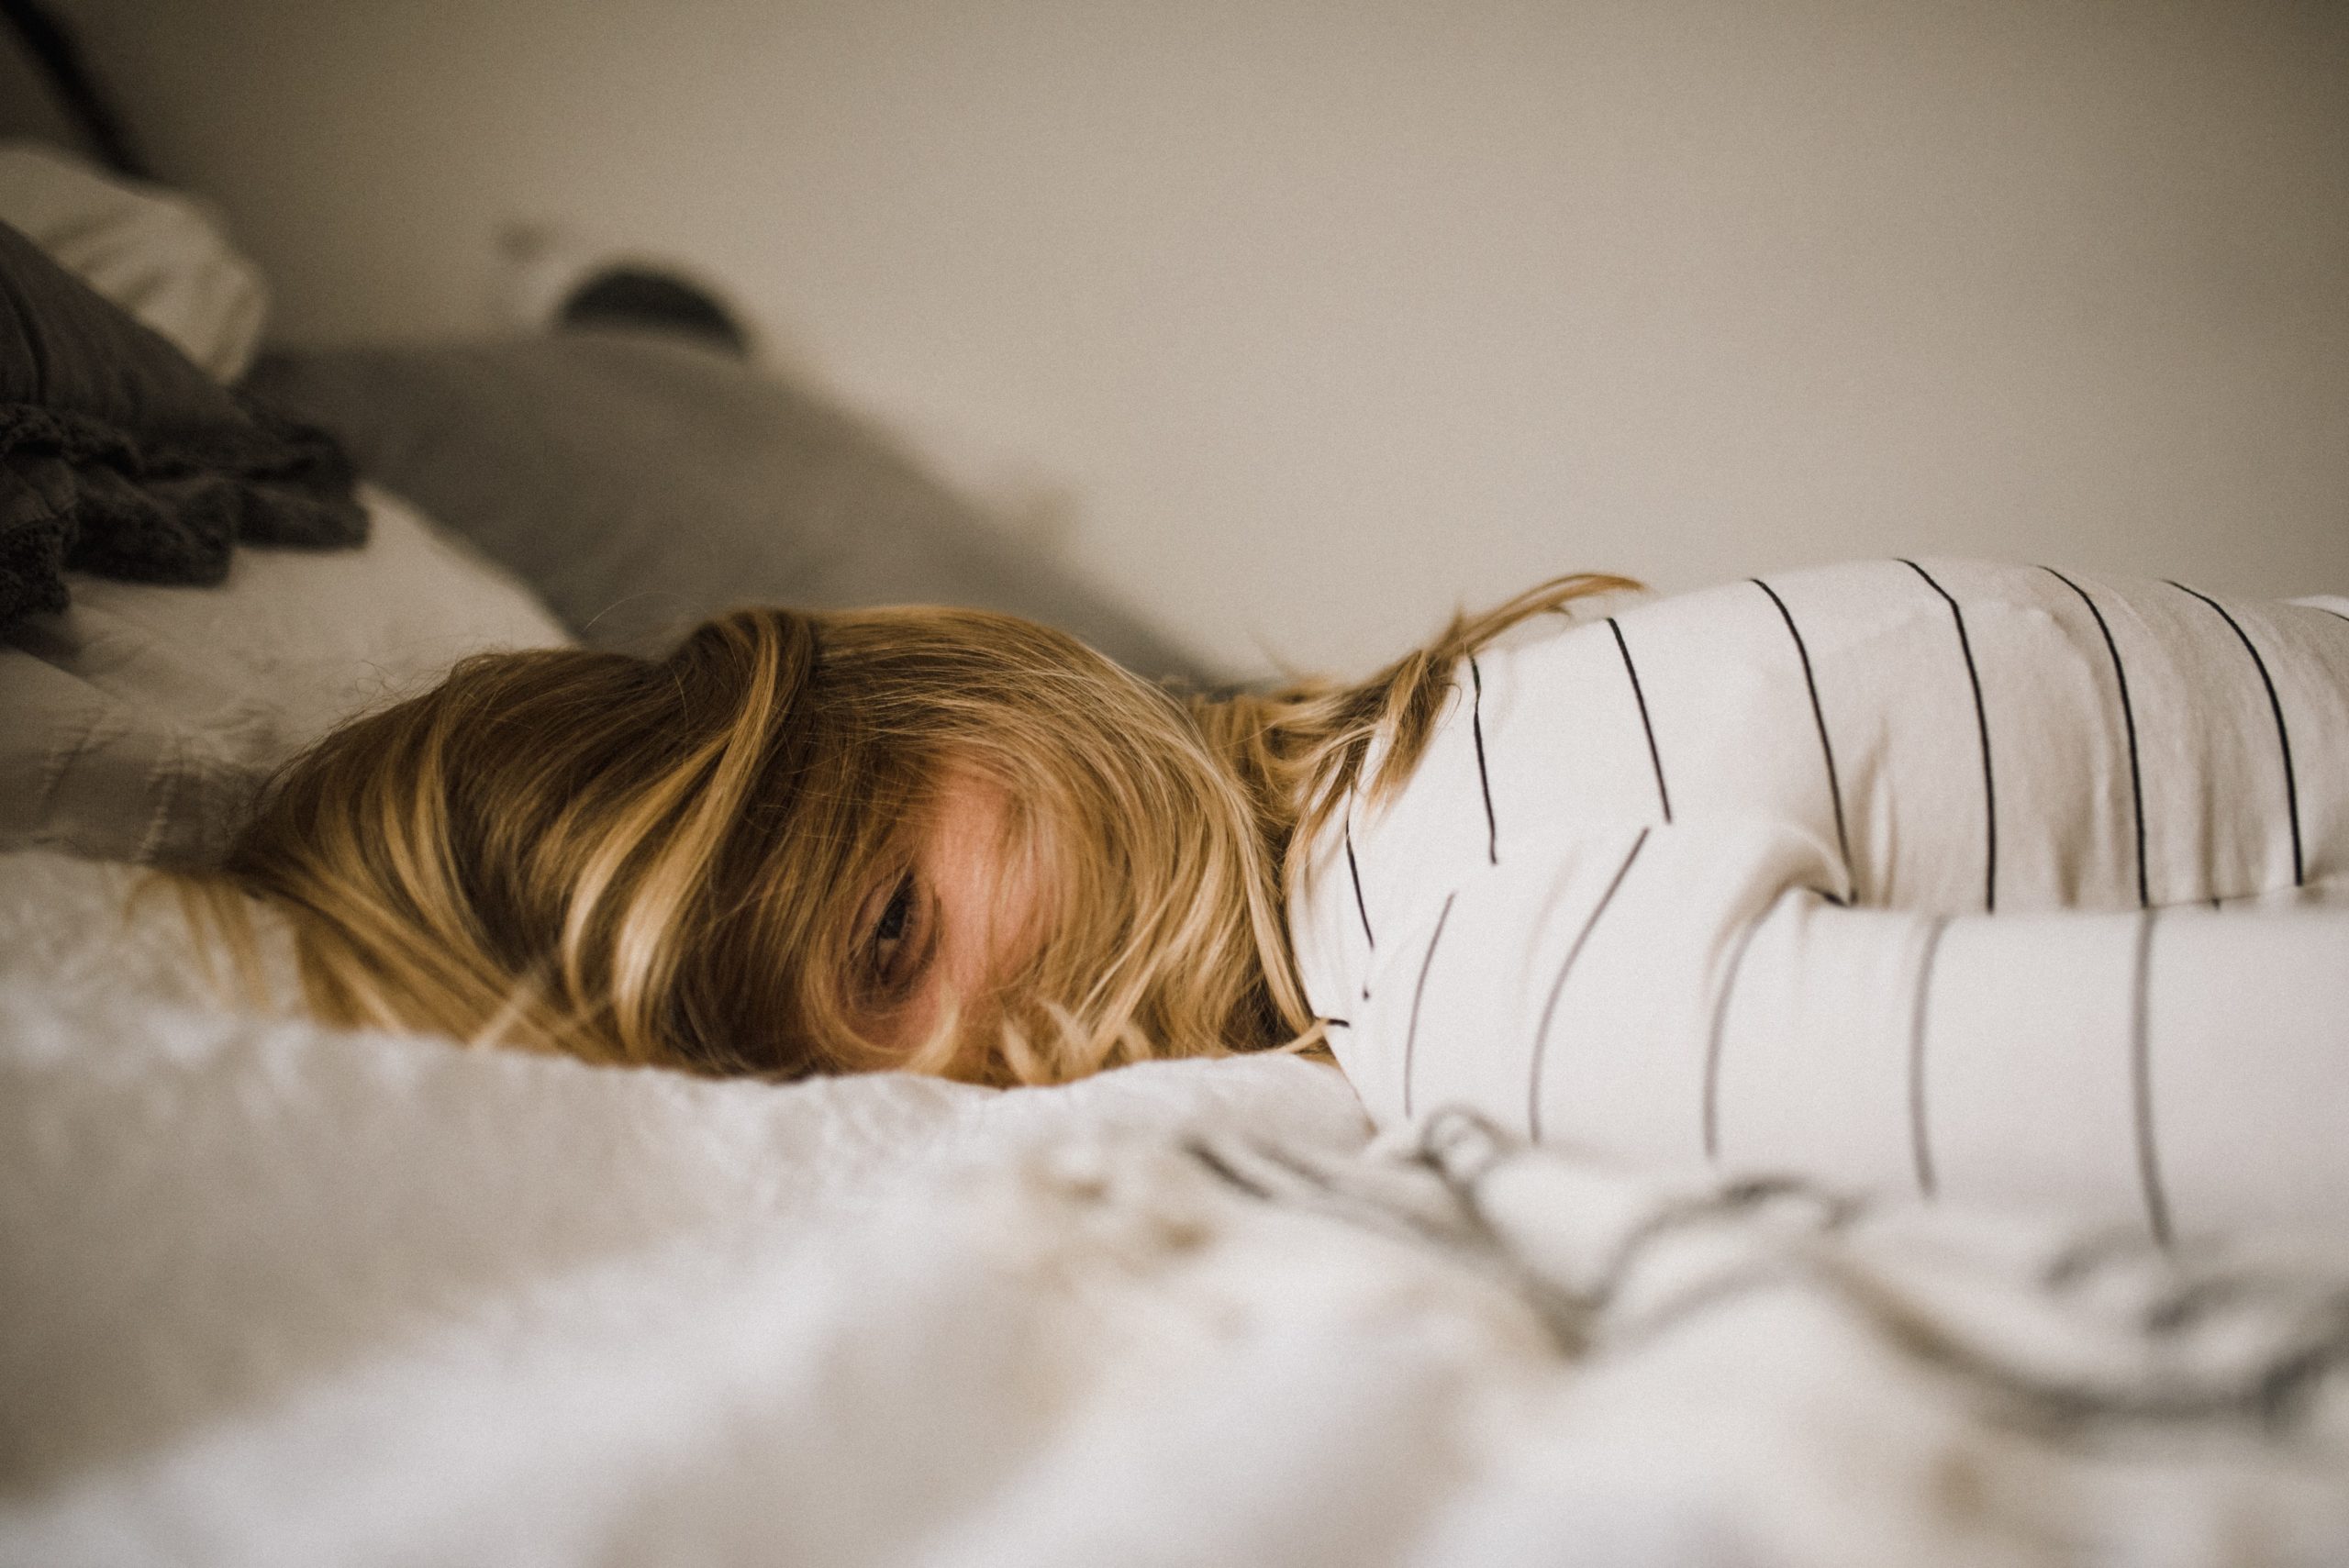 A stressed woman lying on a bed. How to stay sane during COVID-19 :: Albuquerque Moms Blog